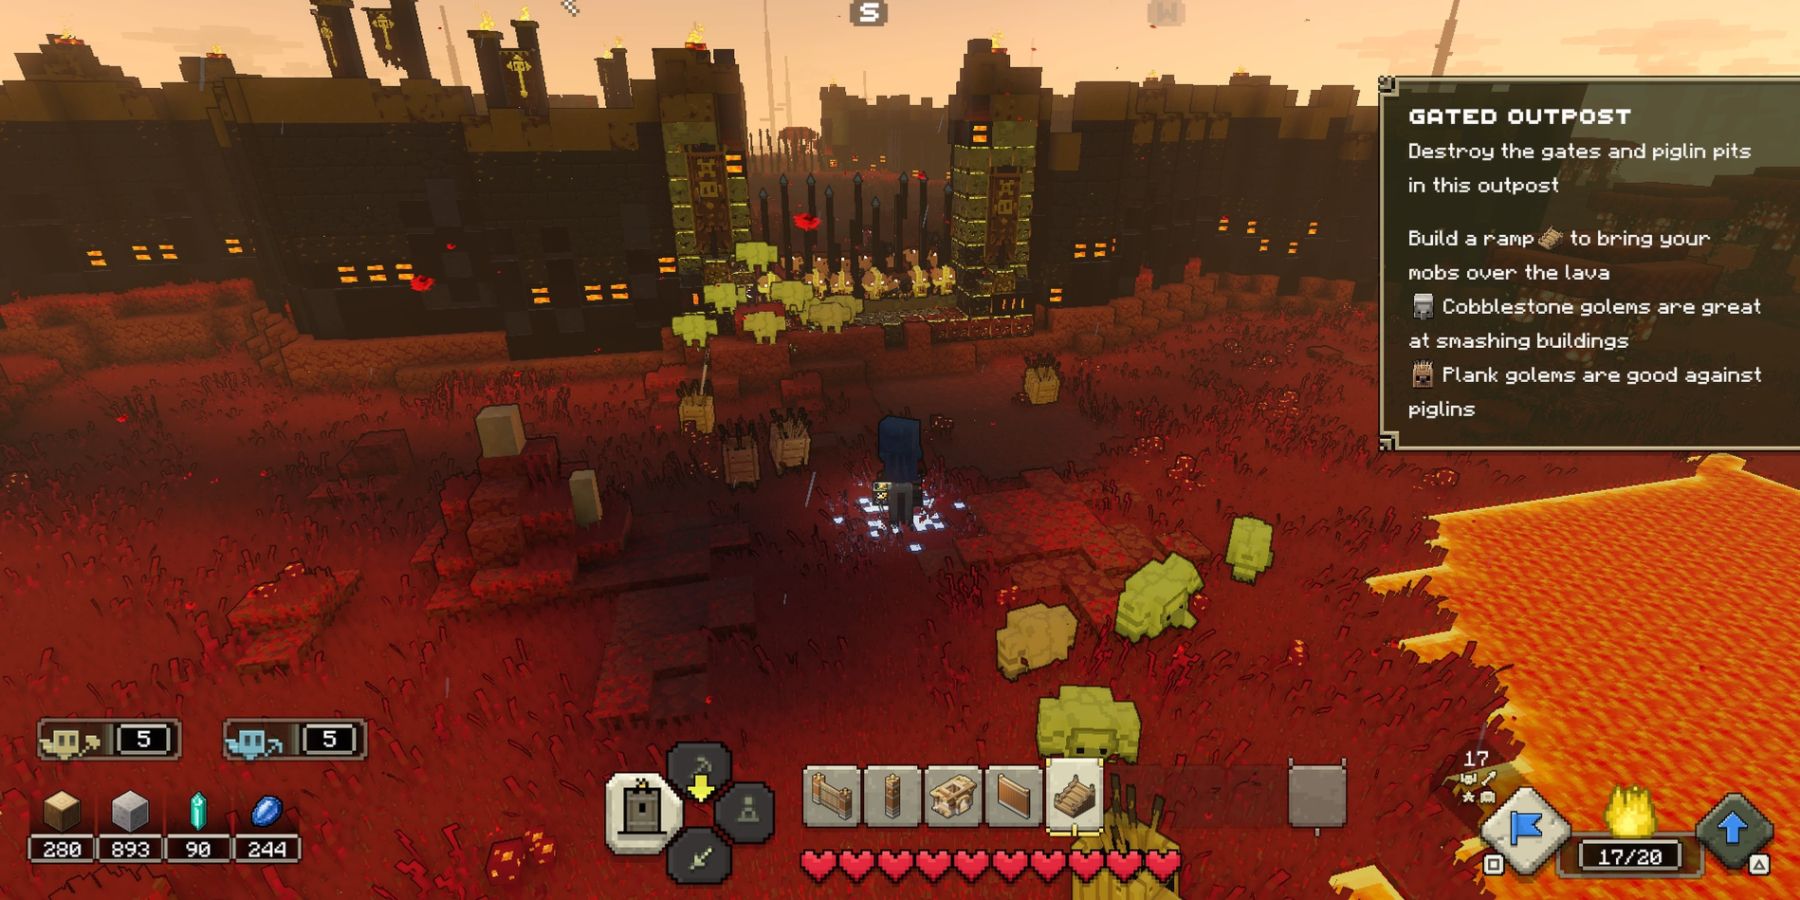 Attacking the Gated Outpost in Minecraft Legends